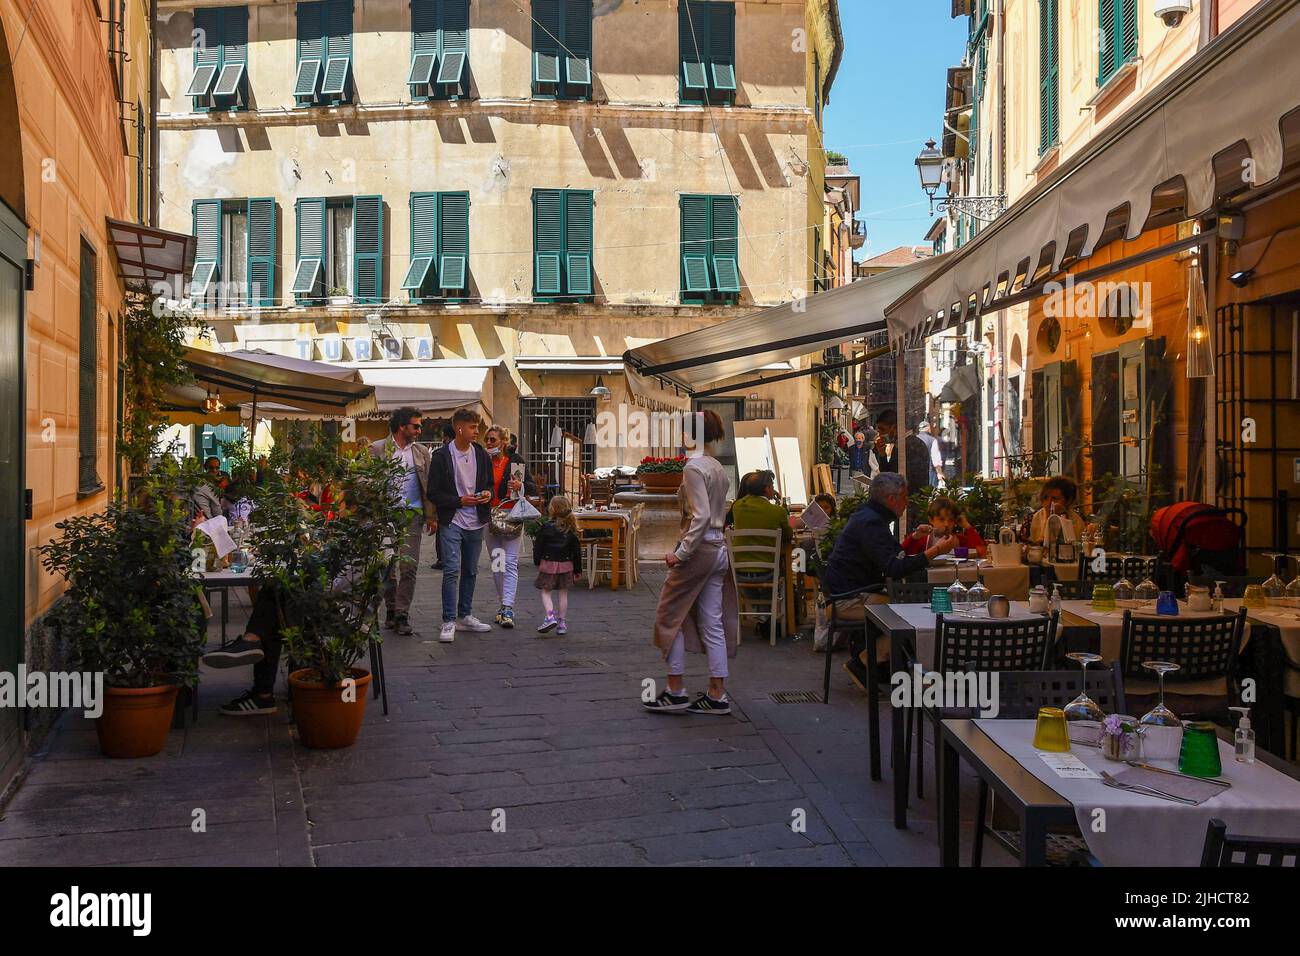 Families having lunch in outdoor restaurants in the old town of Rapallo, Genoa, Liguria, Italy Stock Photo